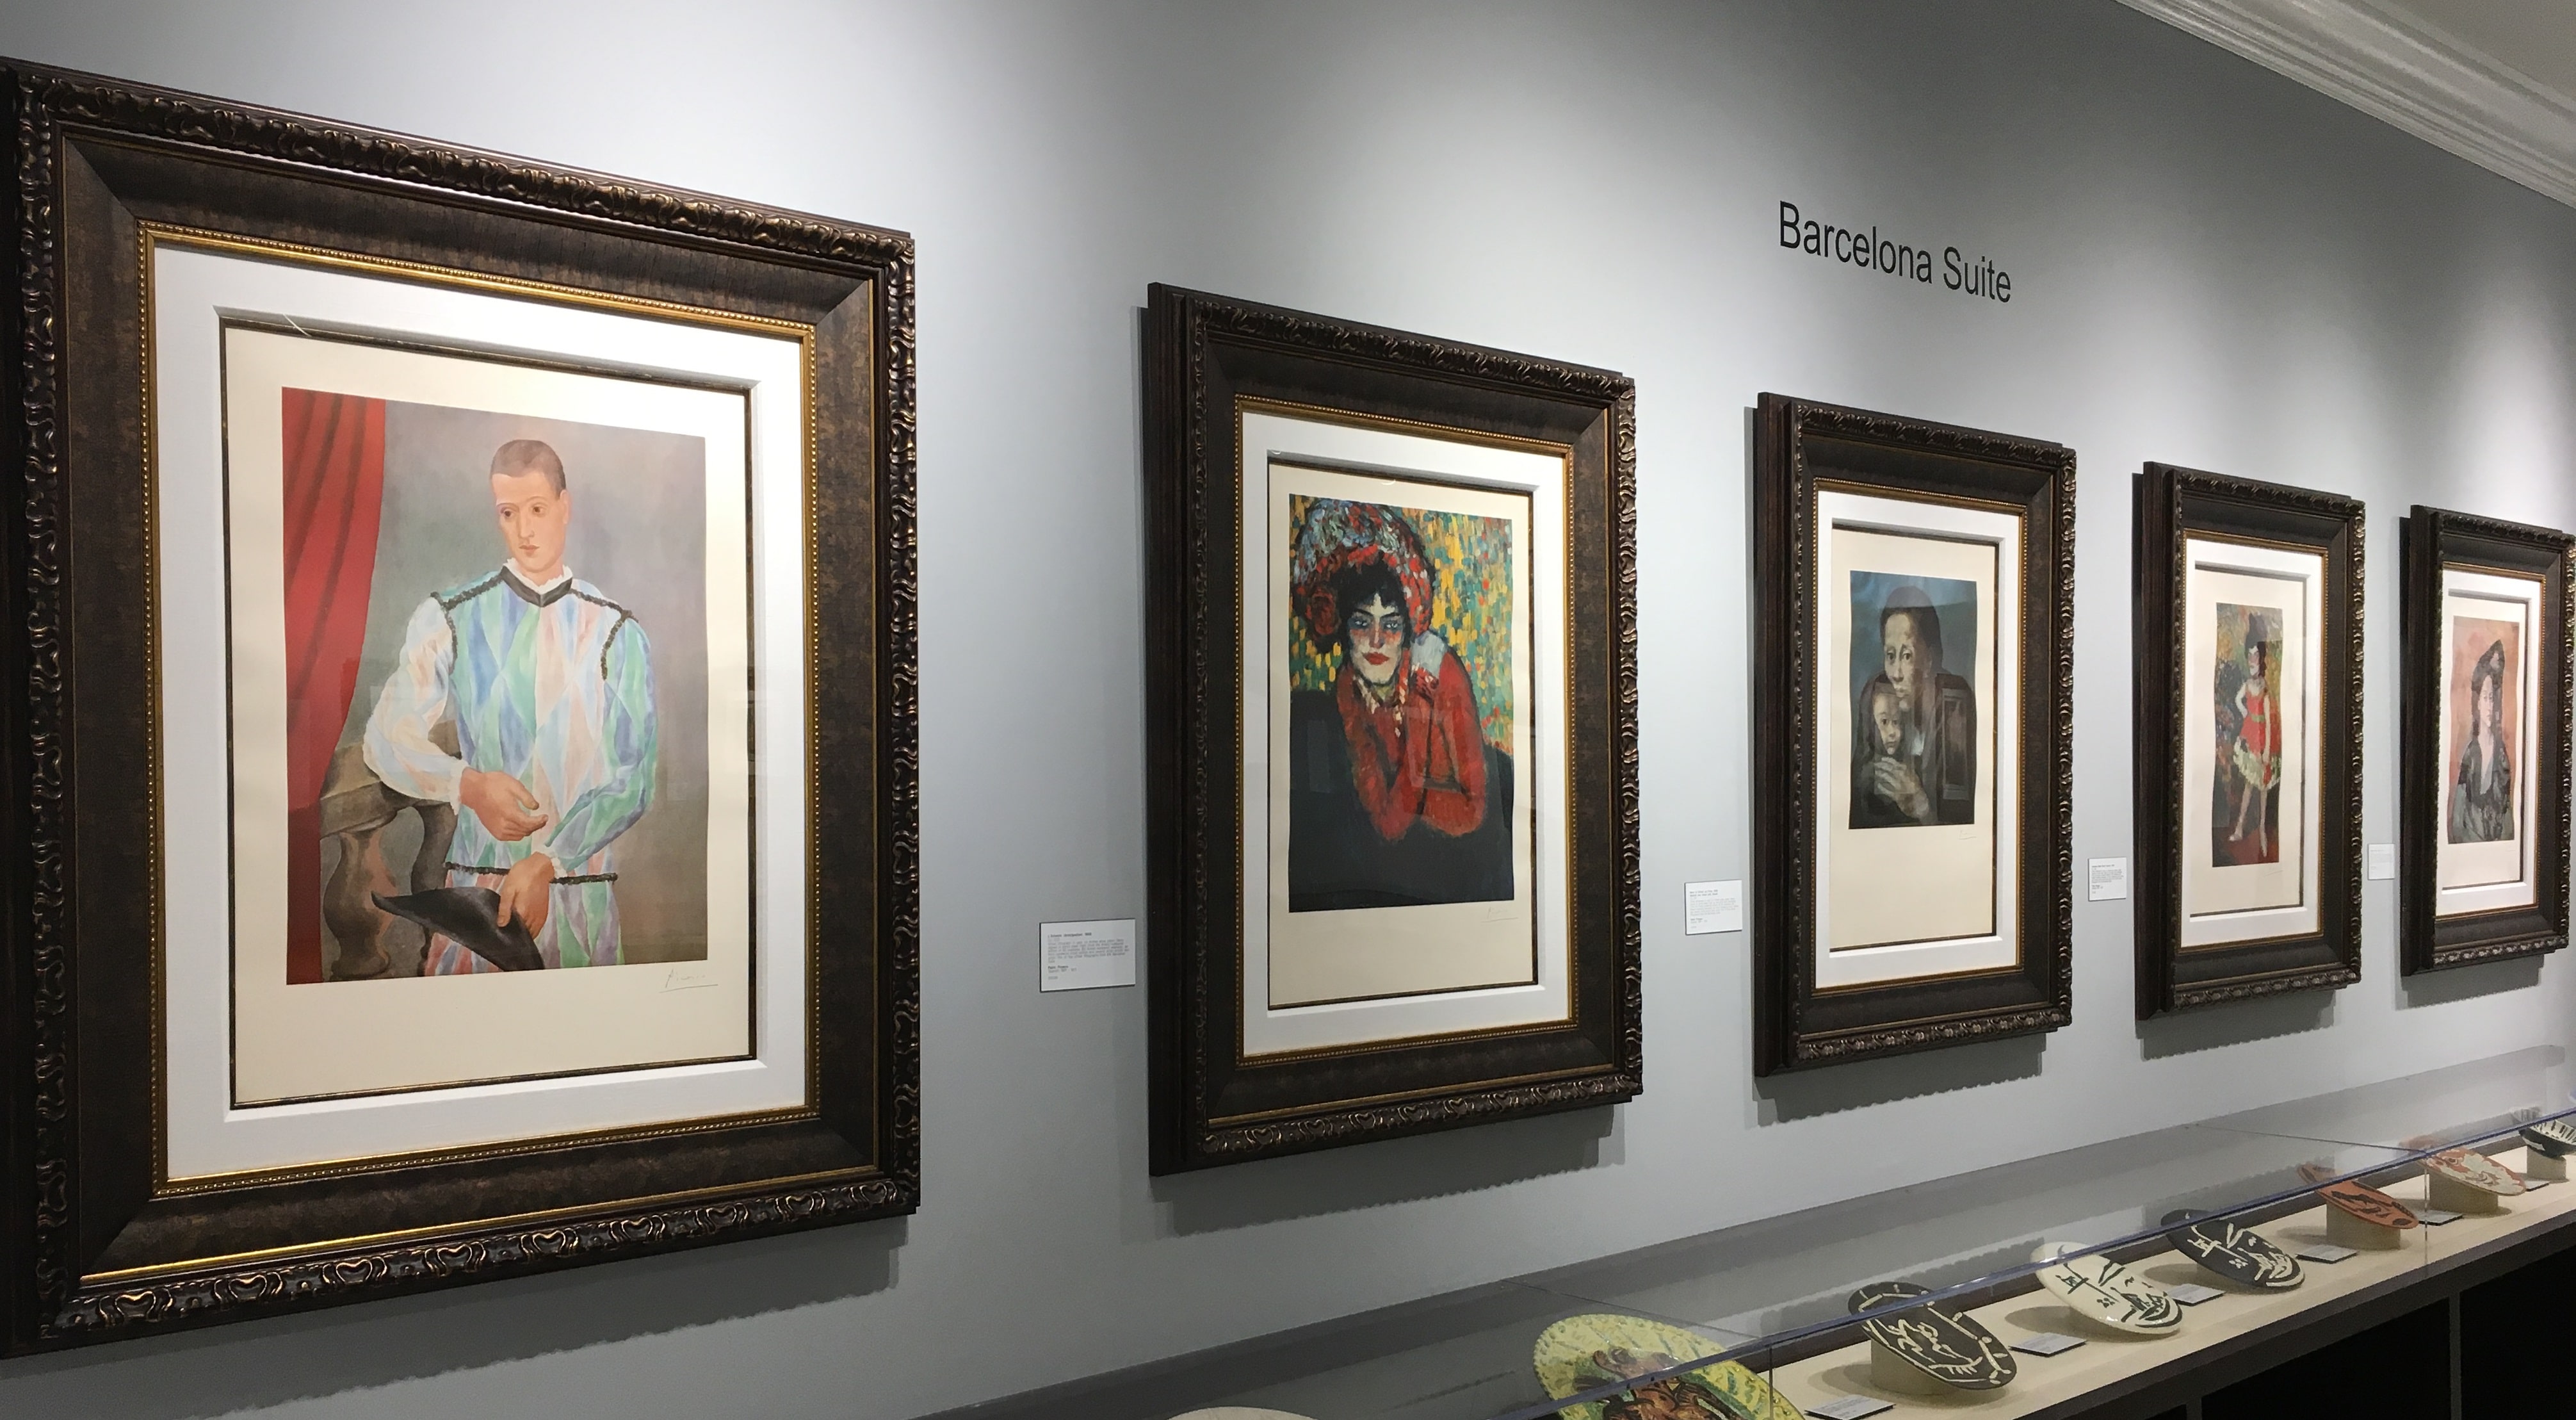 The "Barcelona Suite" gallery in the Picasso salon at Park West Museum